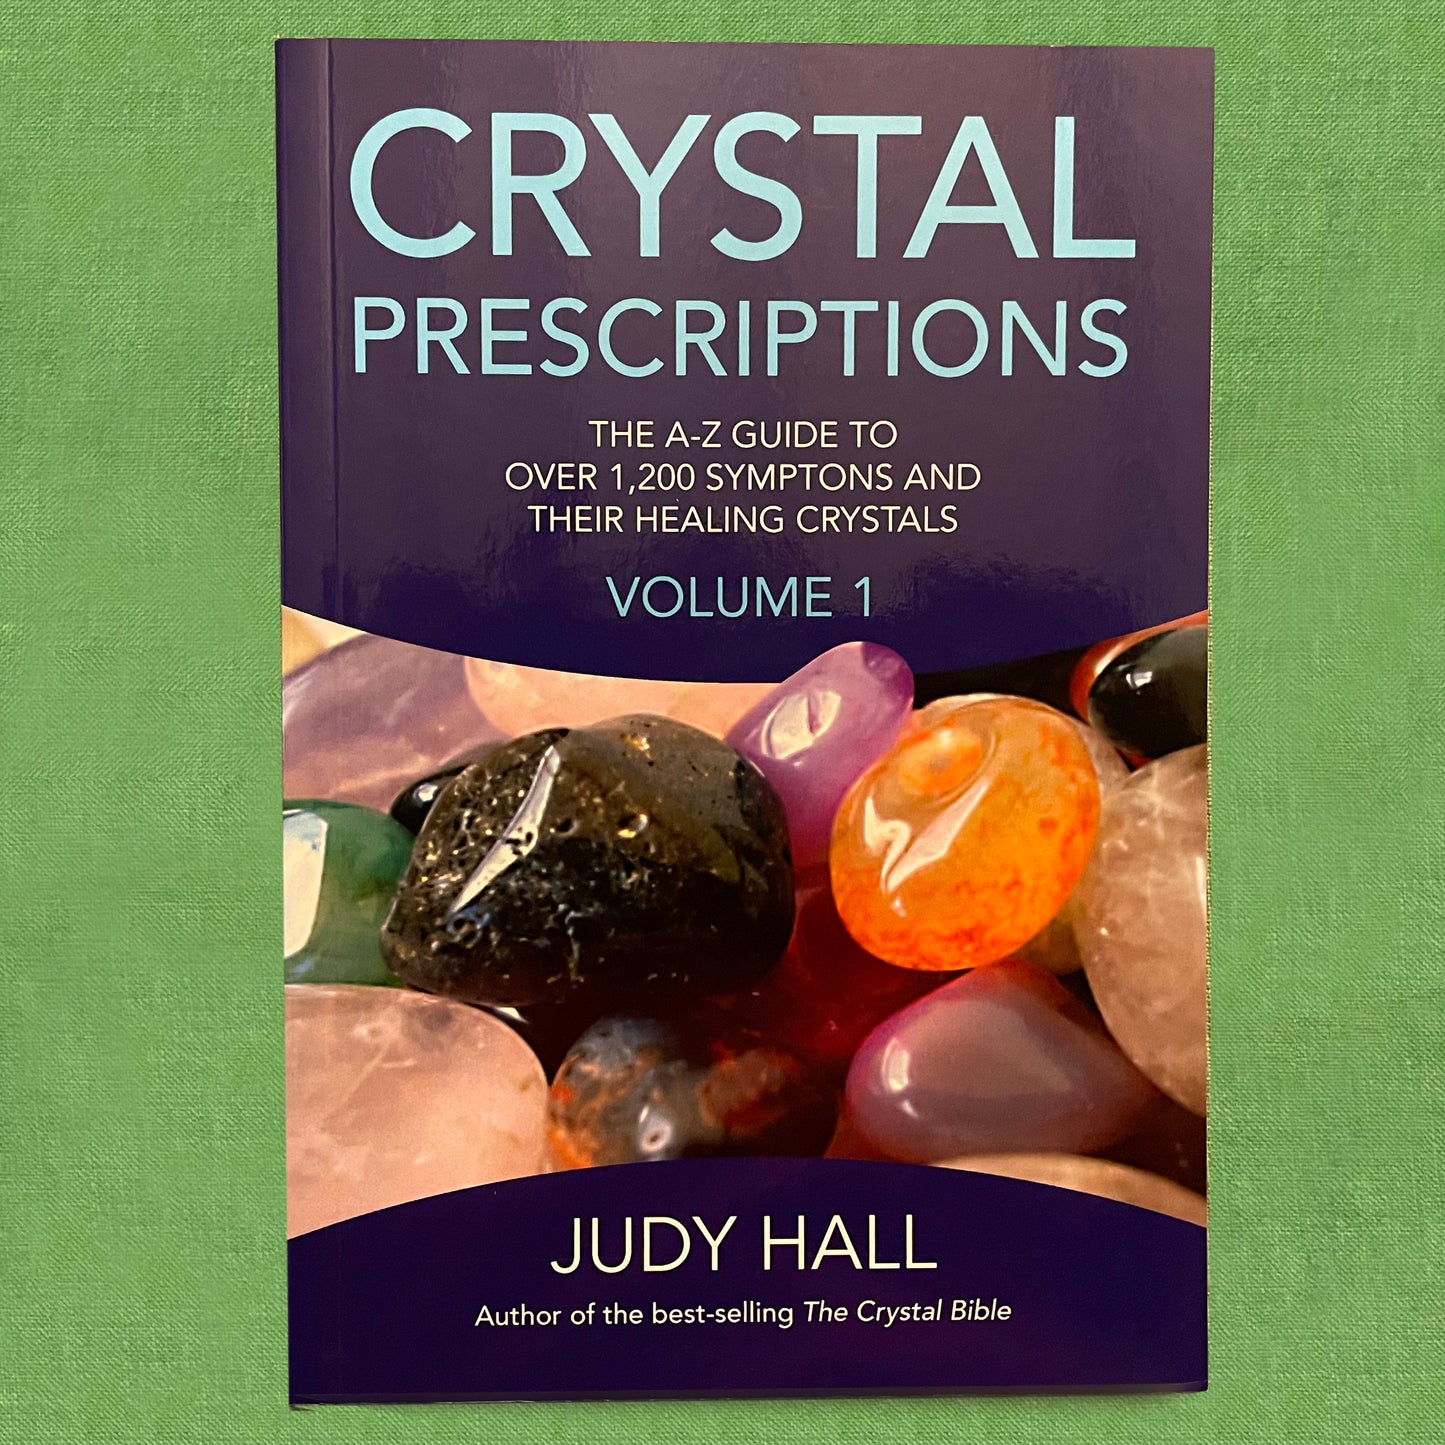 Crystal Prescriptions - The A-Z Guide to Over 1,200 Symptons and their Healing Crystals - Volume 1